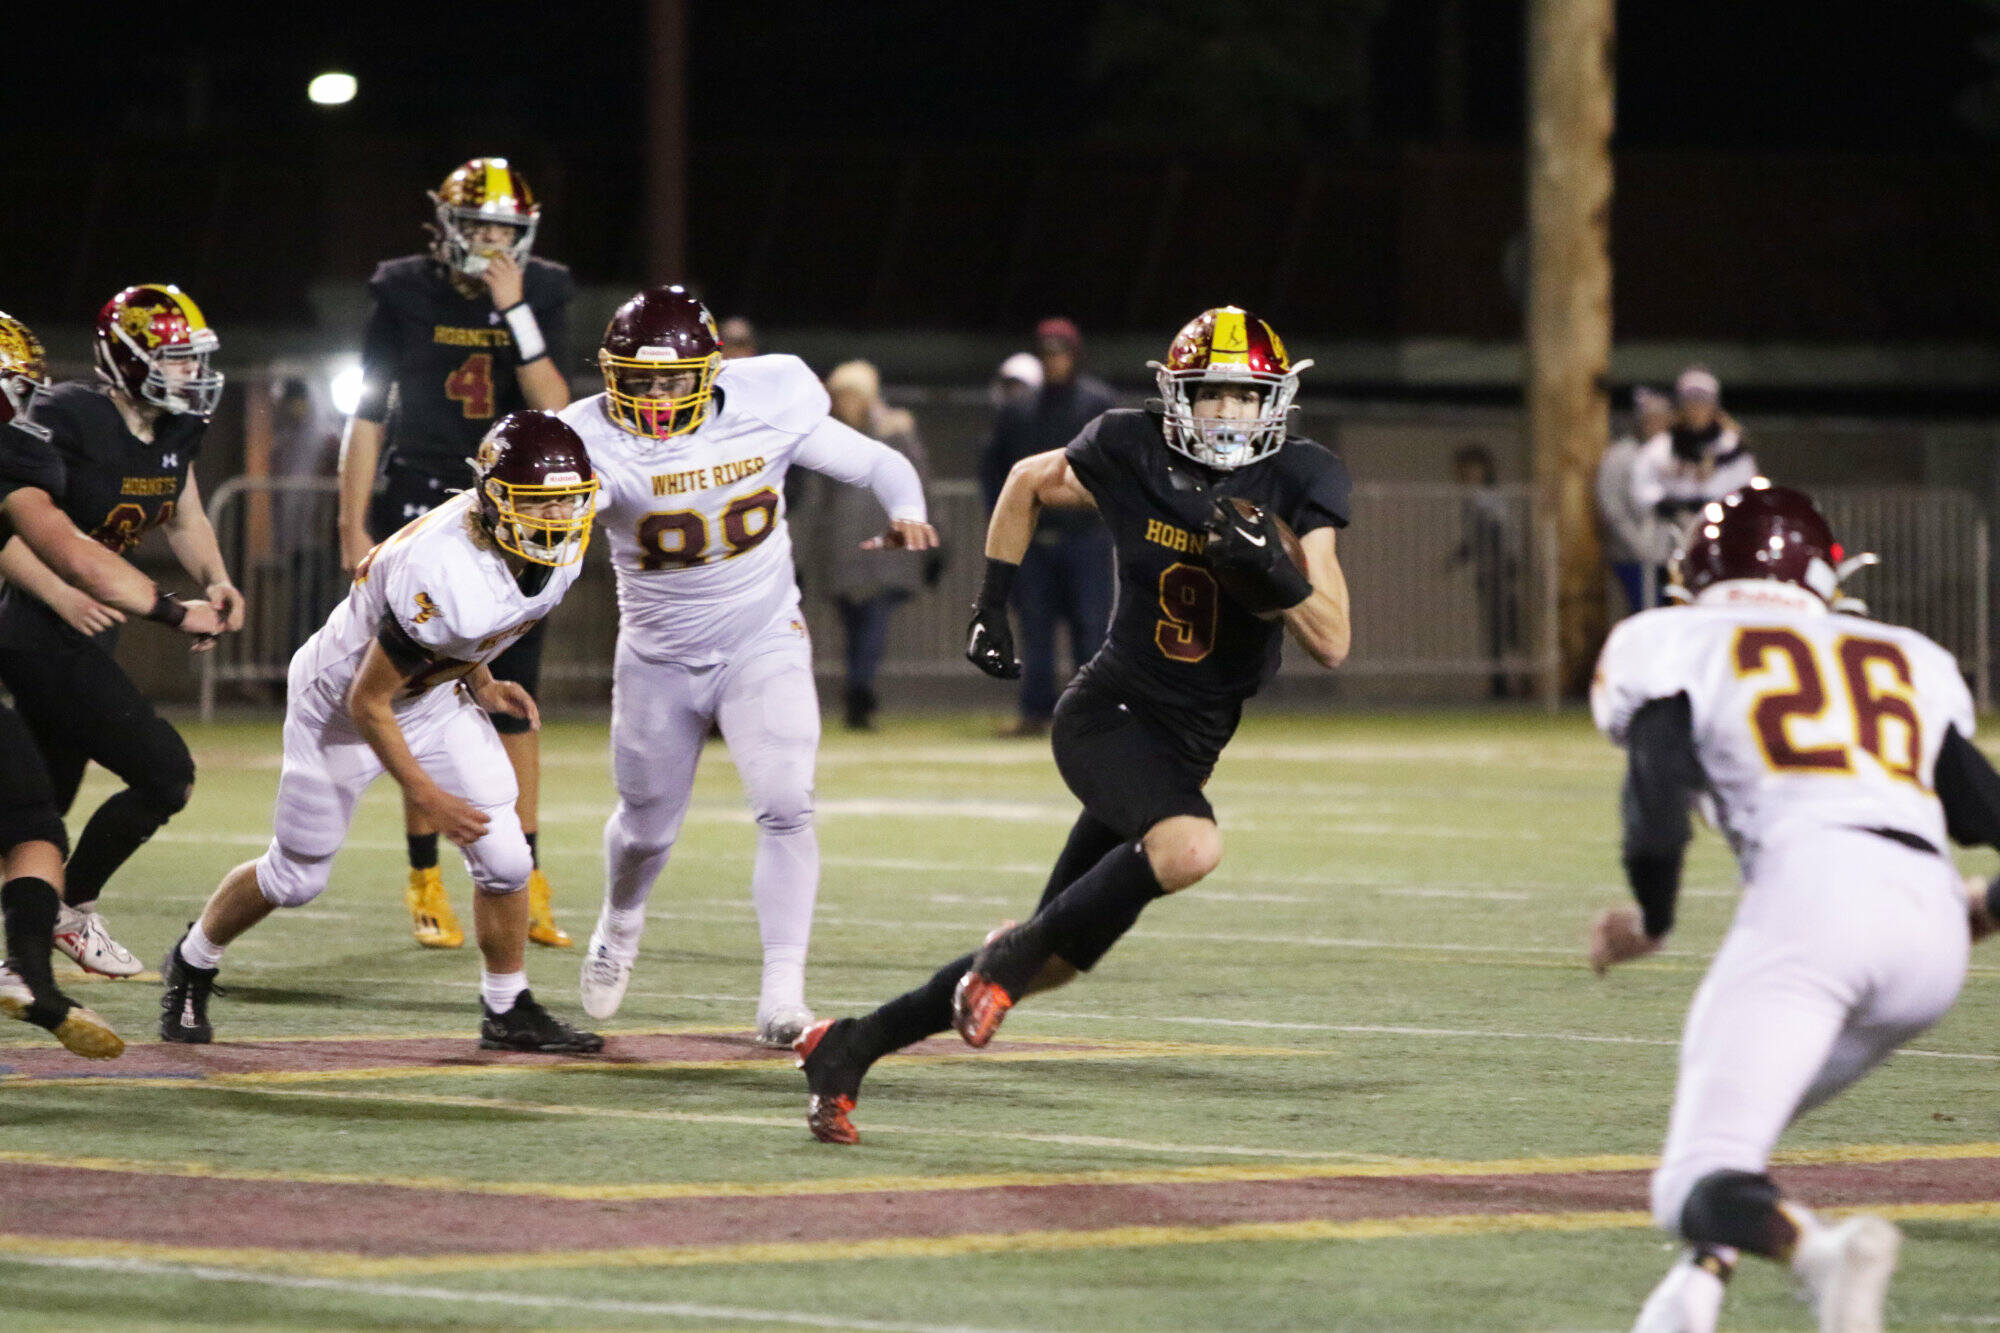 Photo by Todd Overdorf/SonScape Images
#9 Wyatt Neu speeds to the edge for another Enumclaw first down in the 2023 Battle of the Bridge game against White River.